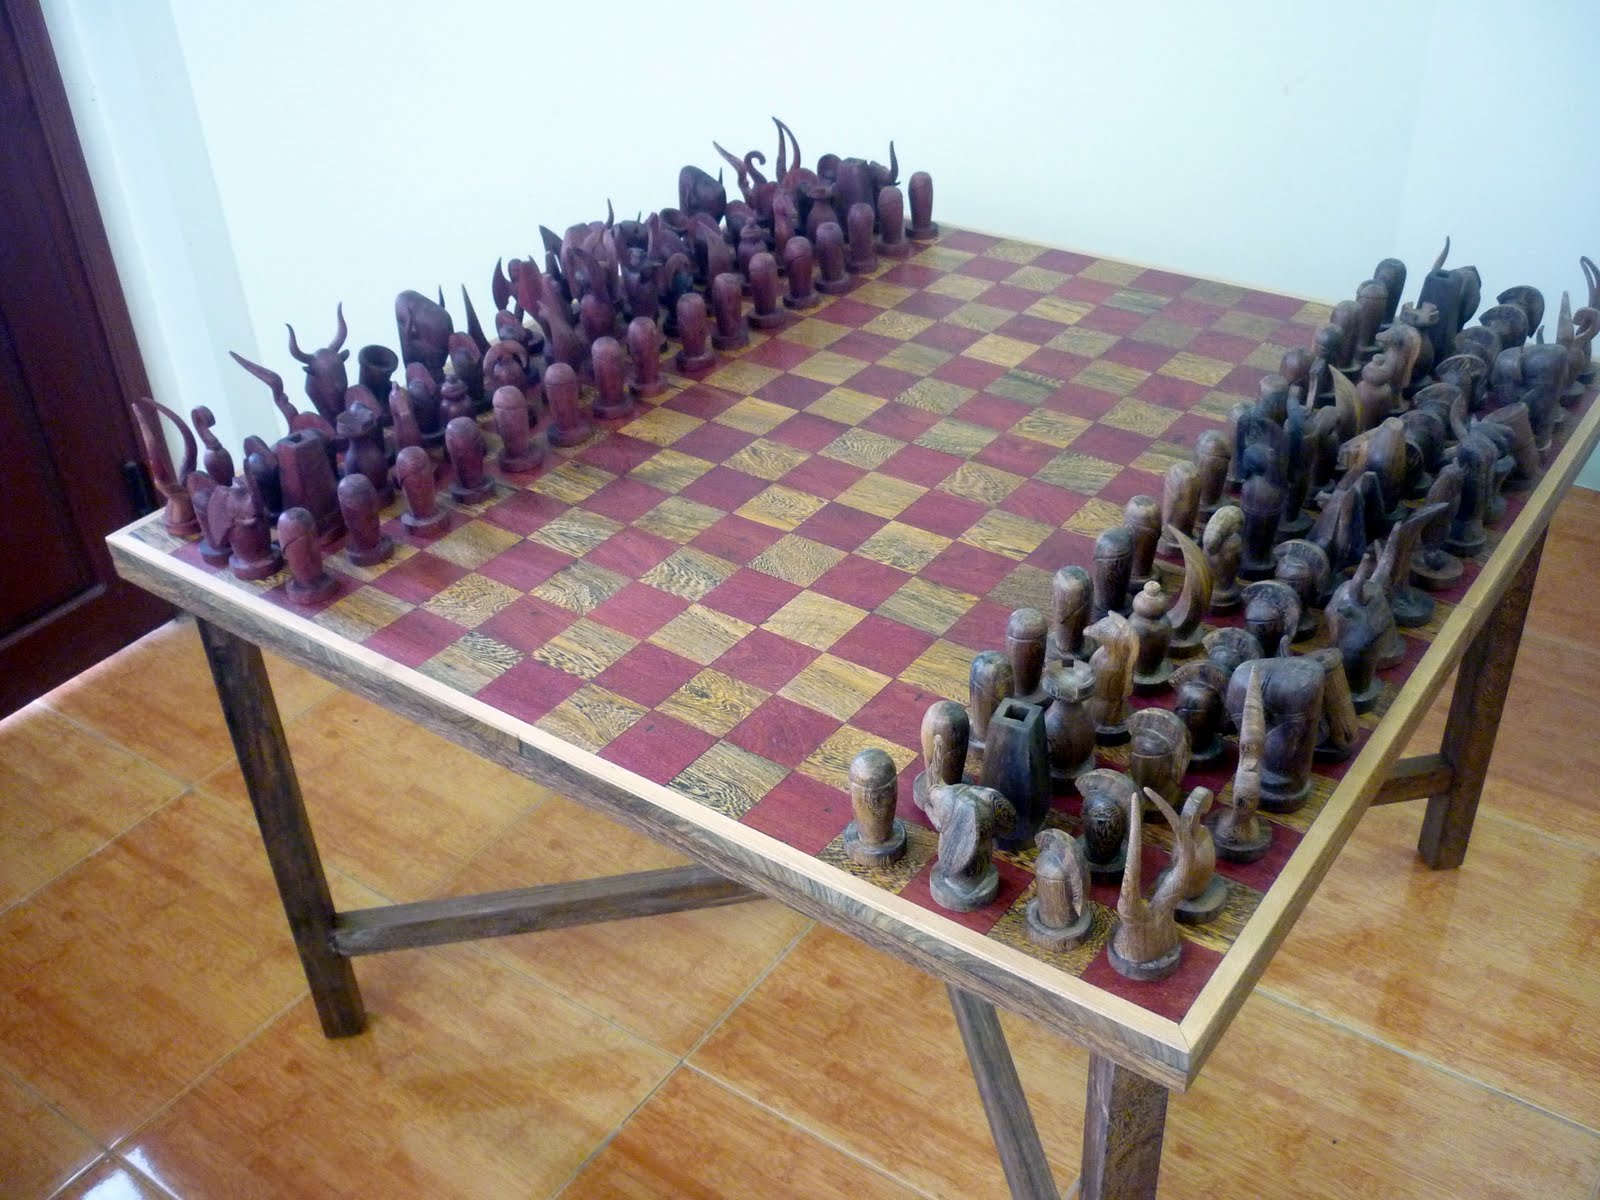 Chess variants and 3D chess